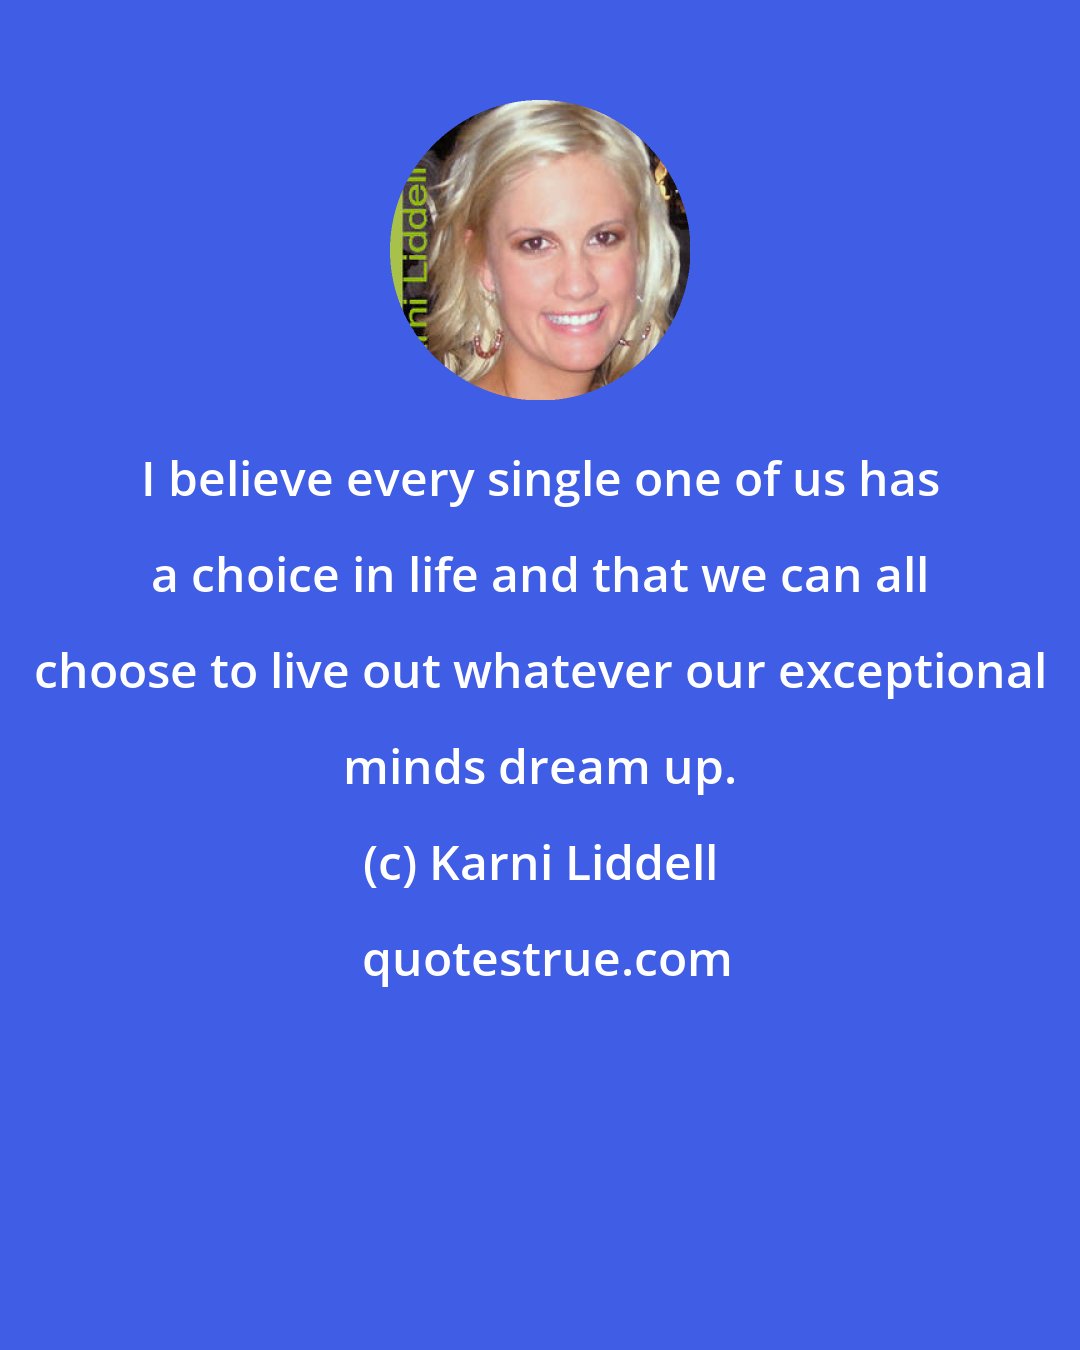 Karni Liddell: I believe every single one of us has a choice in life and that we can all choose to live out whatever our exceptional minds dream up.